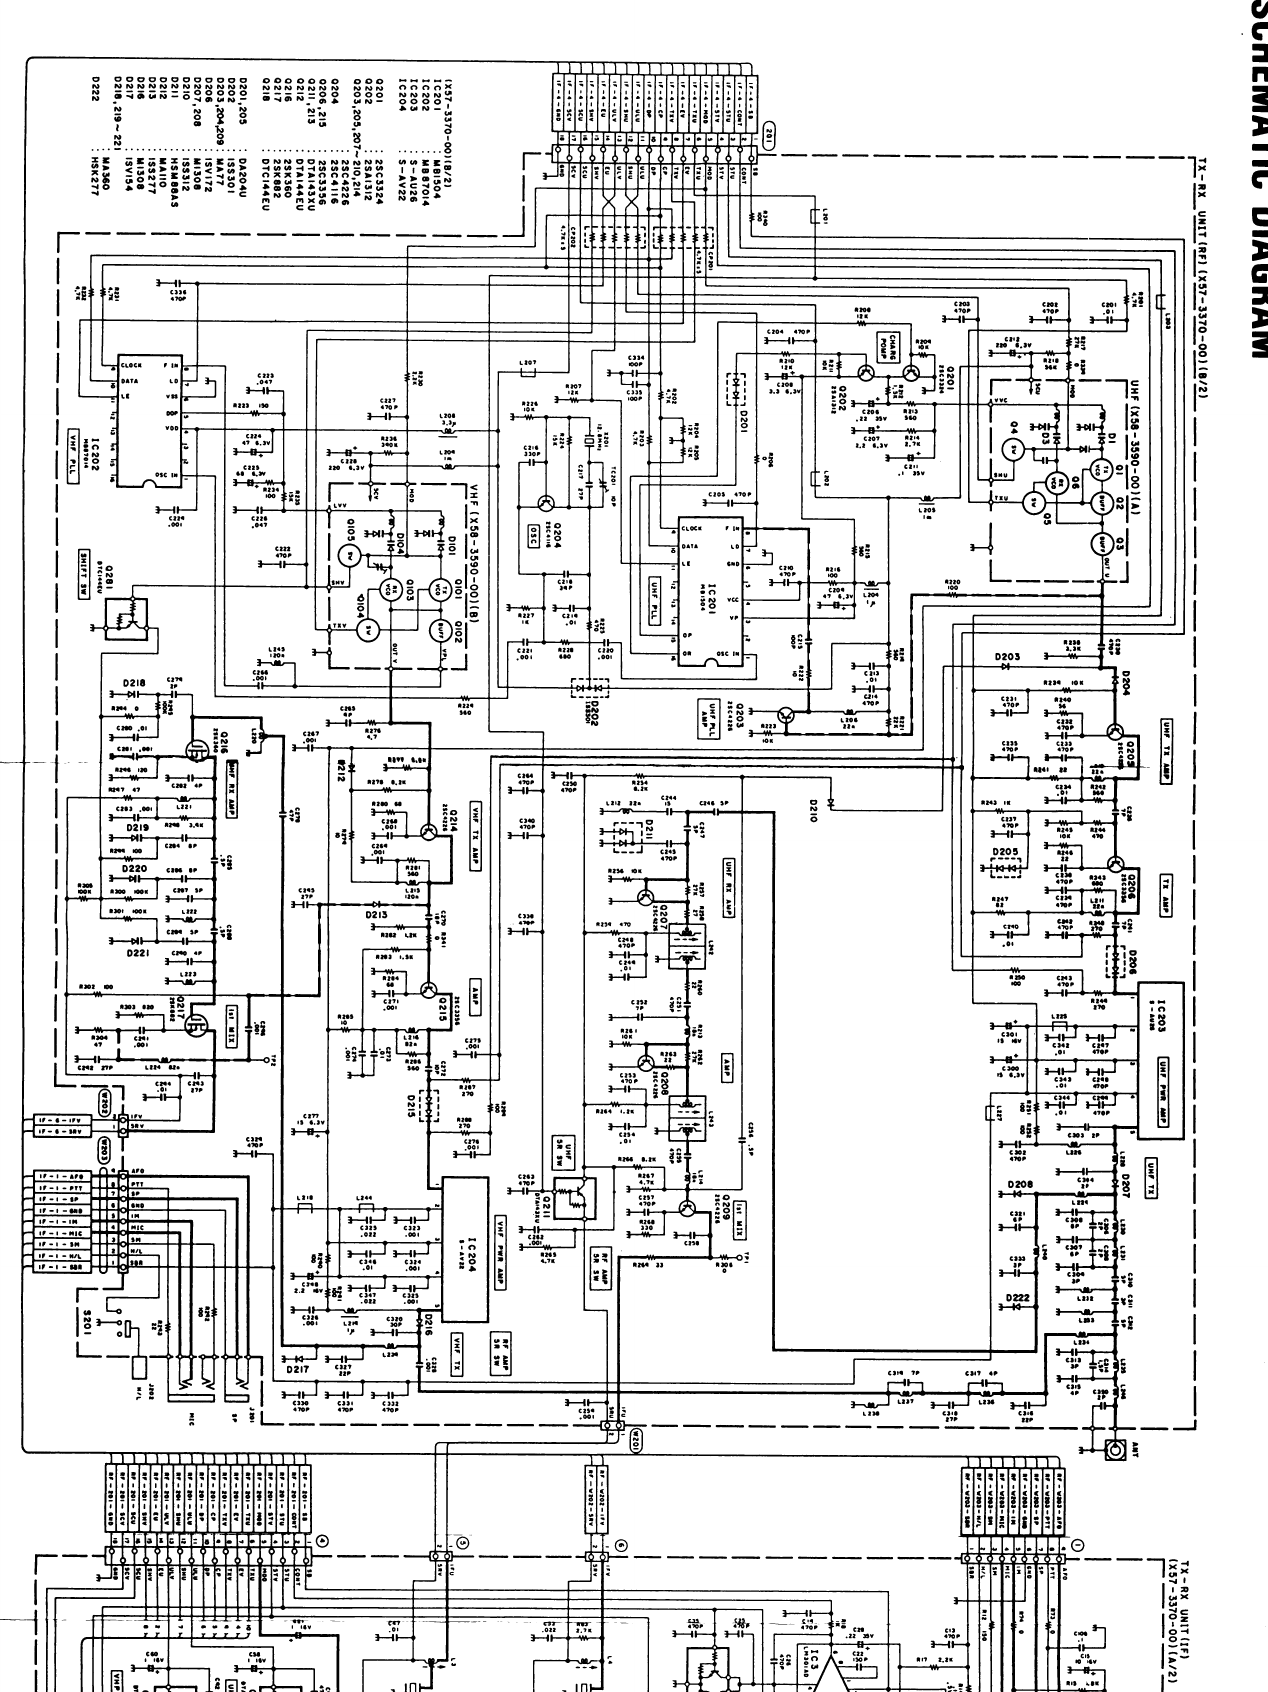 Page 4 of 4 - KENWOOD--TH-75-Schematic